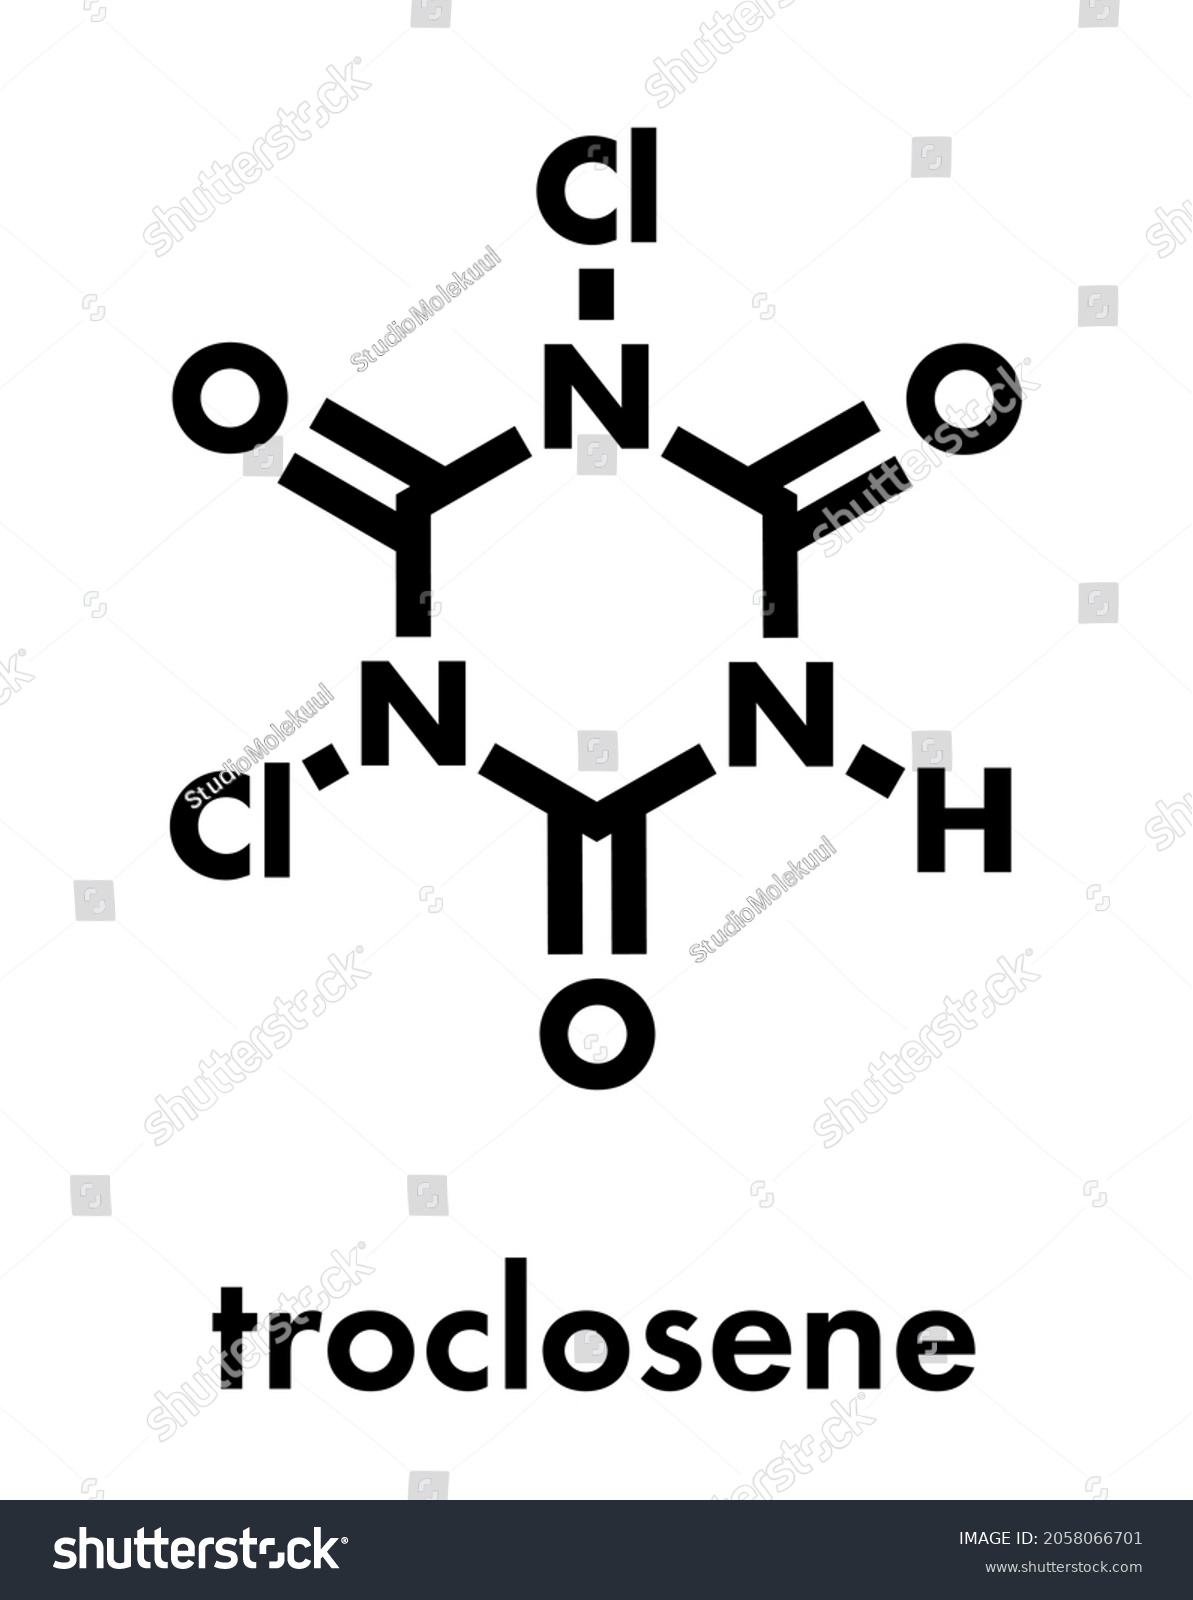 SVG of Troclosene (dichloroisocyanuric acid) molecule. Used as disinfectant, deodorant, biocide, detergent and in water purification. Skeletal formula. svg